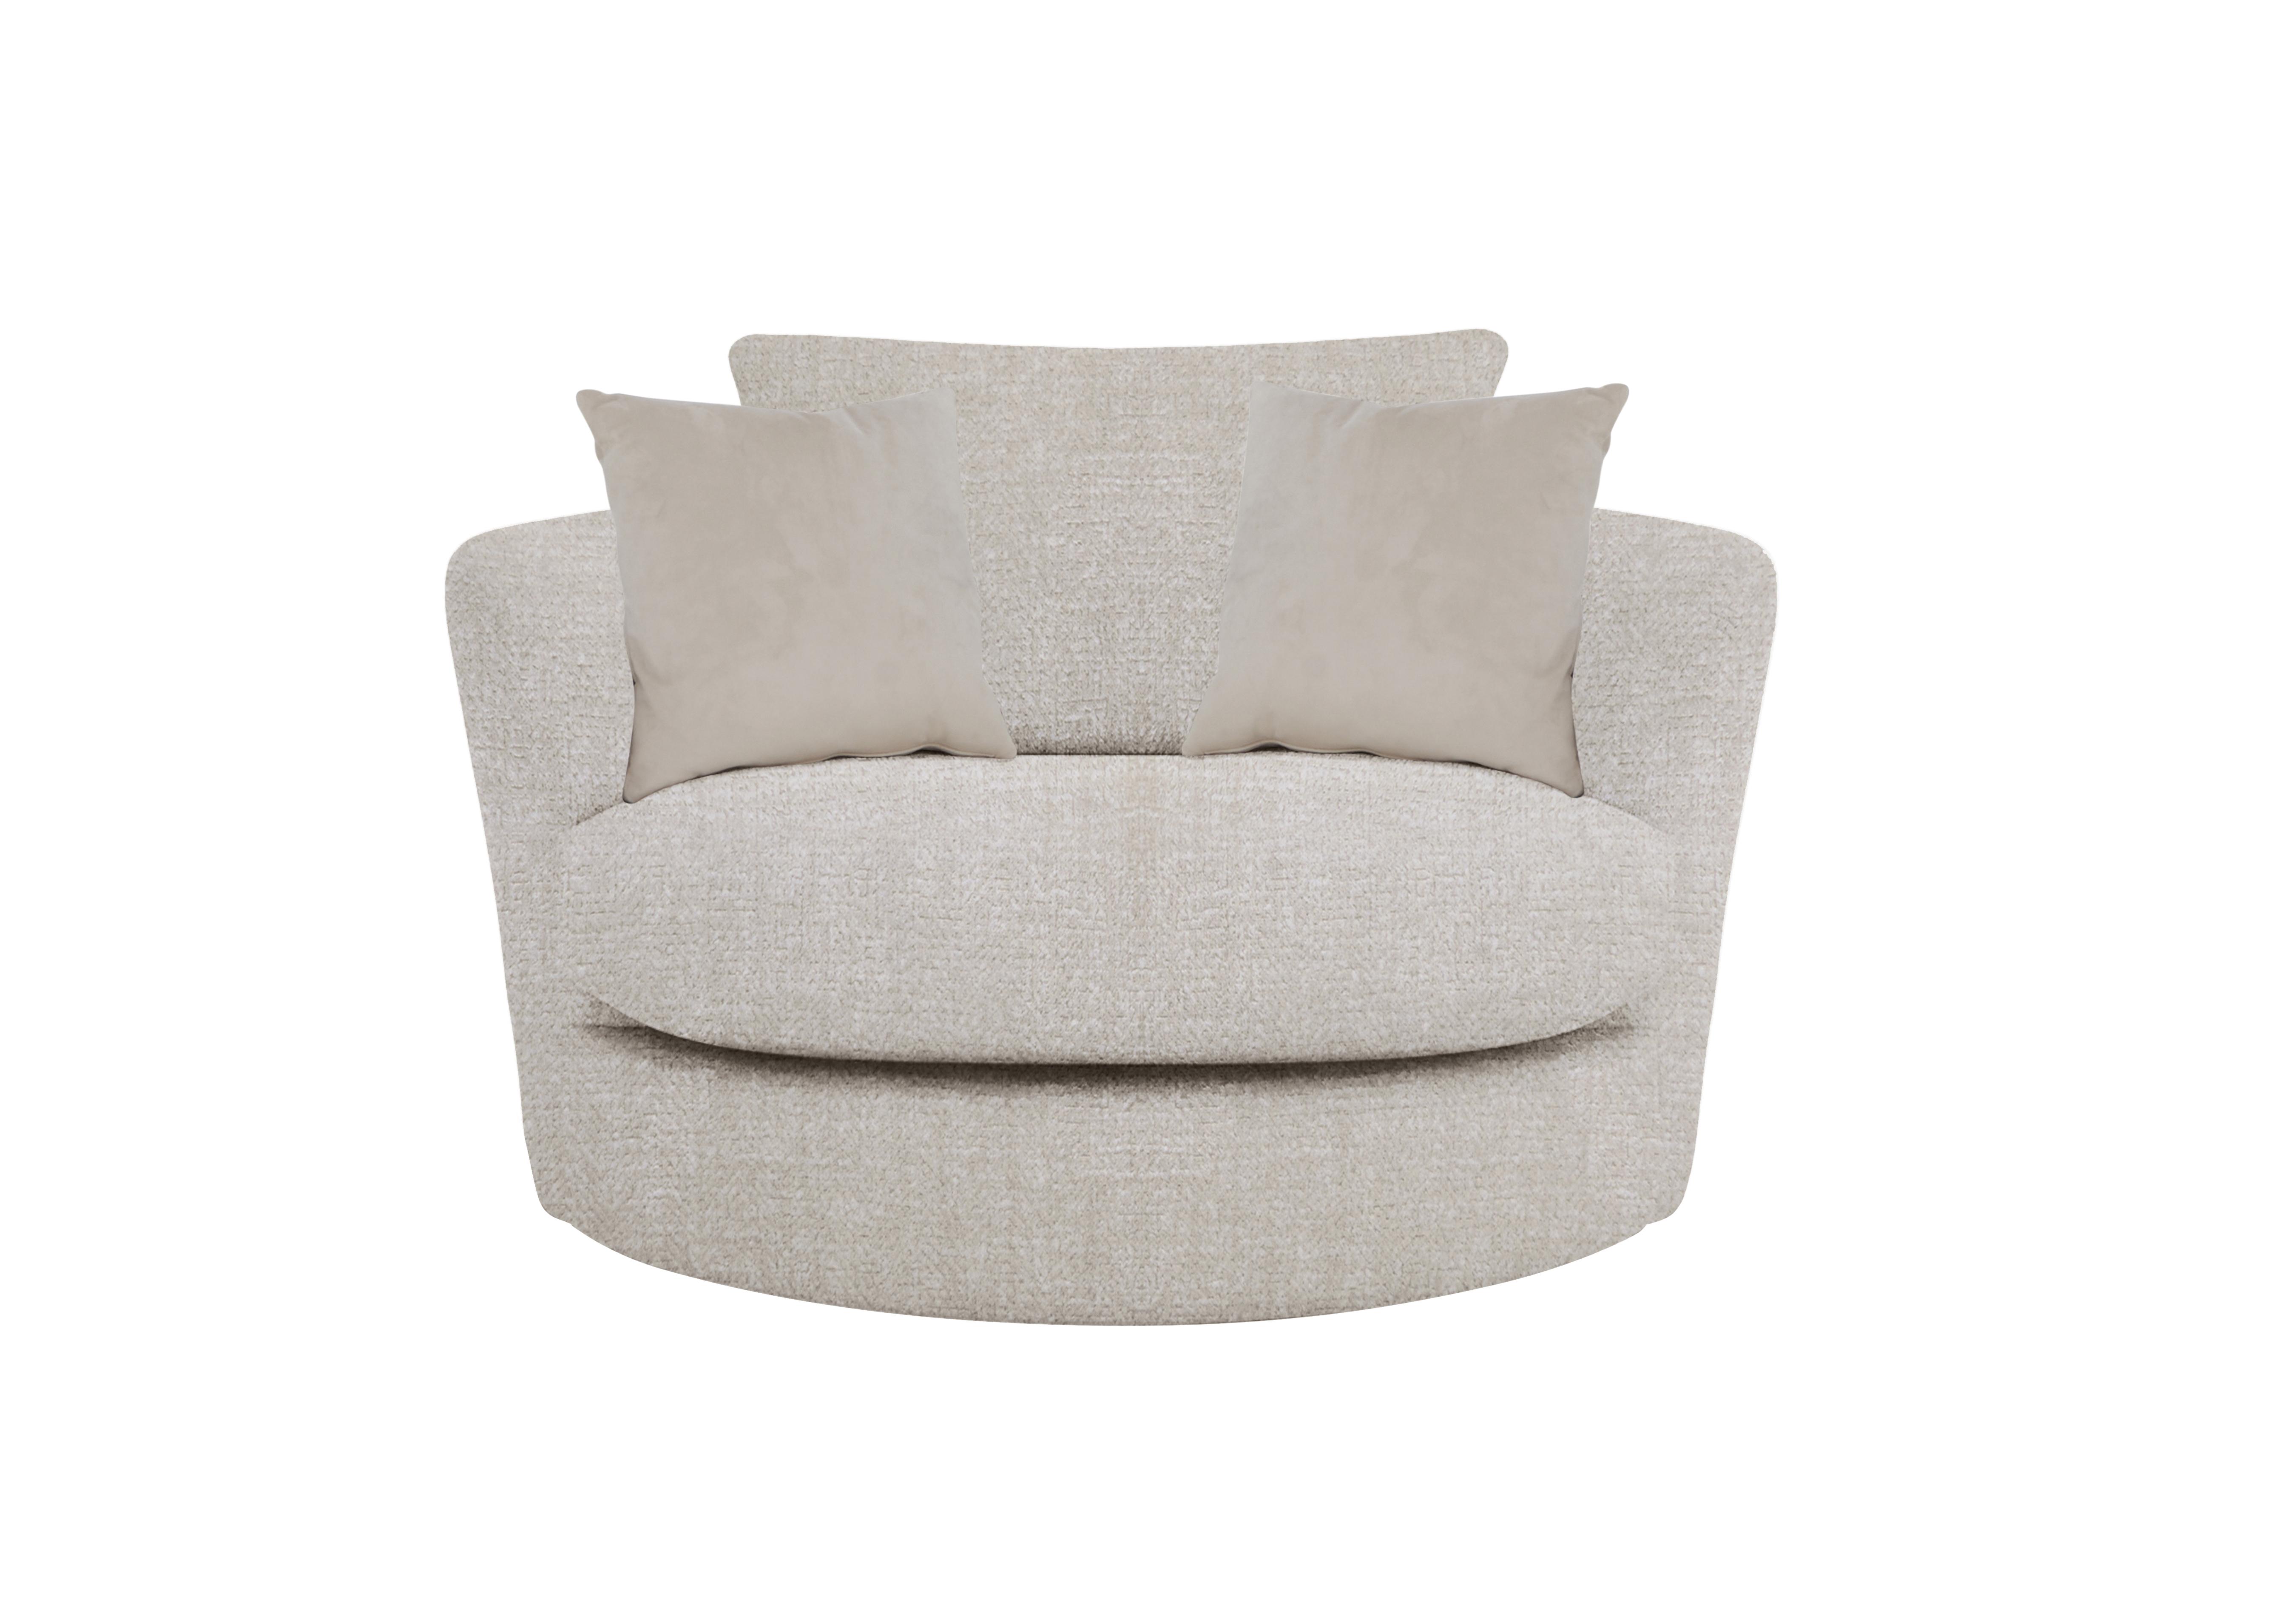 Boutique Pandora Large Swivel Chair in Plain Ivory on Furniture Village